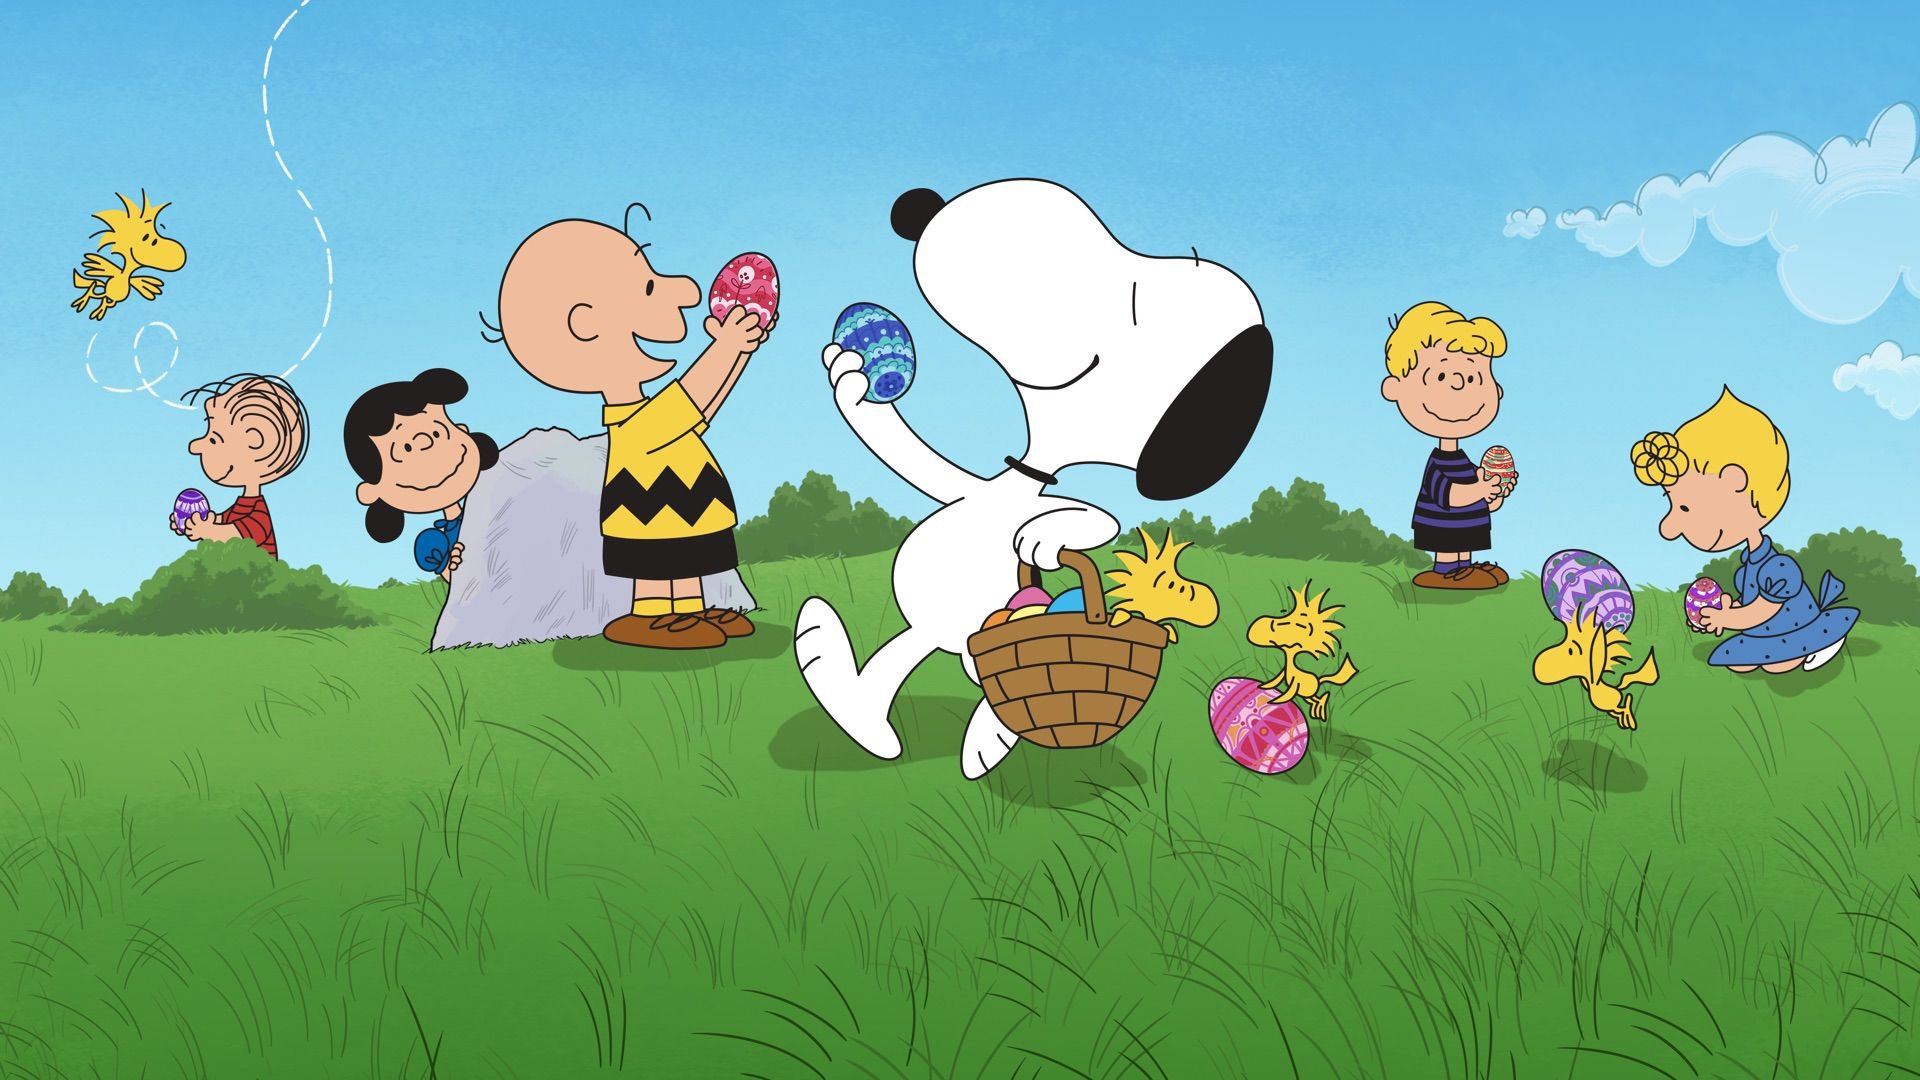 It's the Easter Beagle, Charlie Brown! background